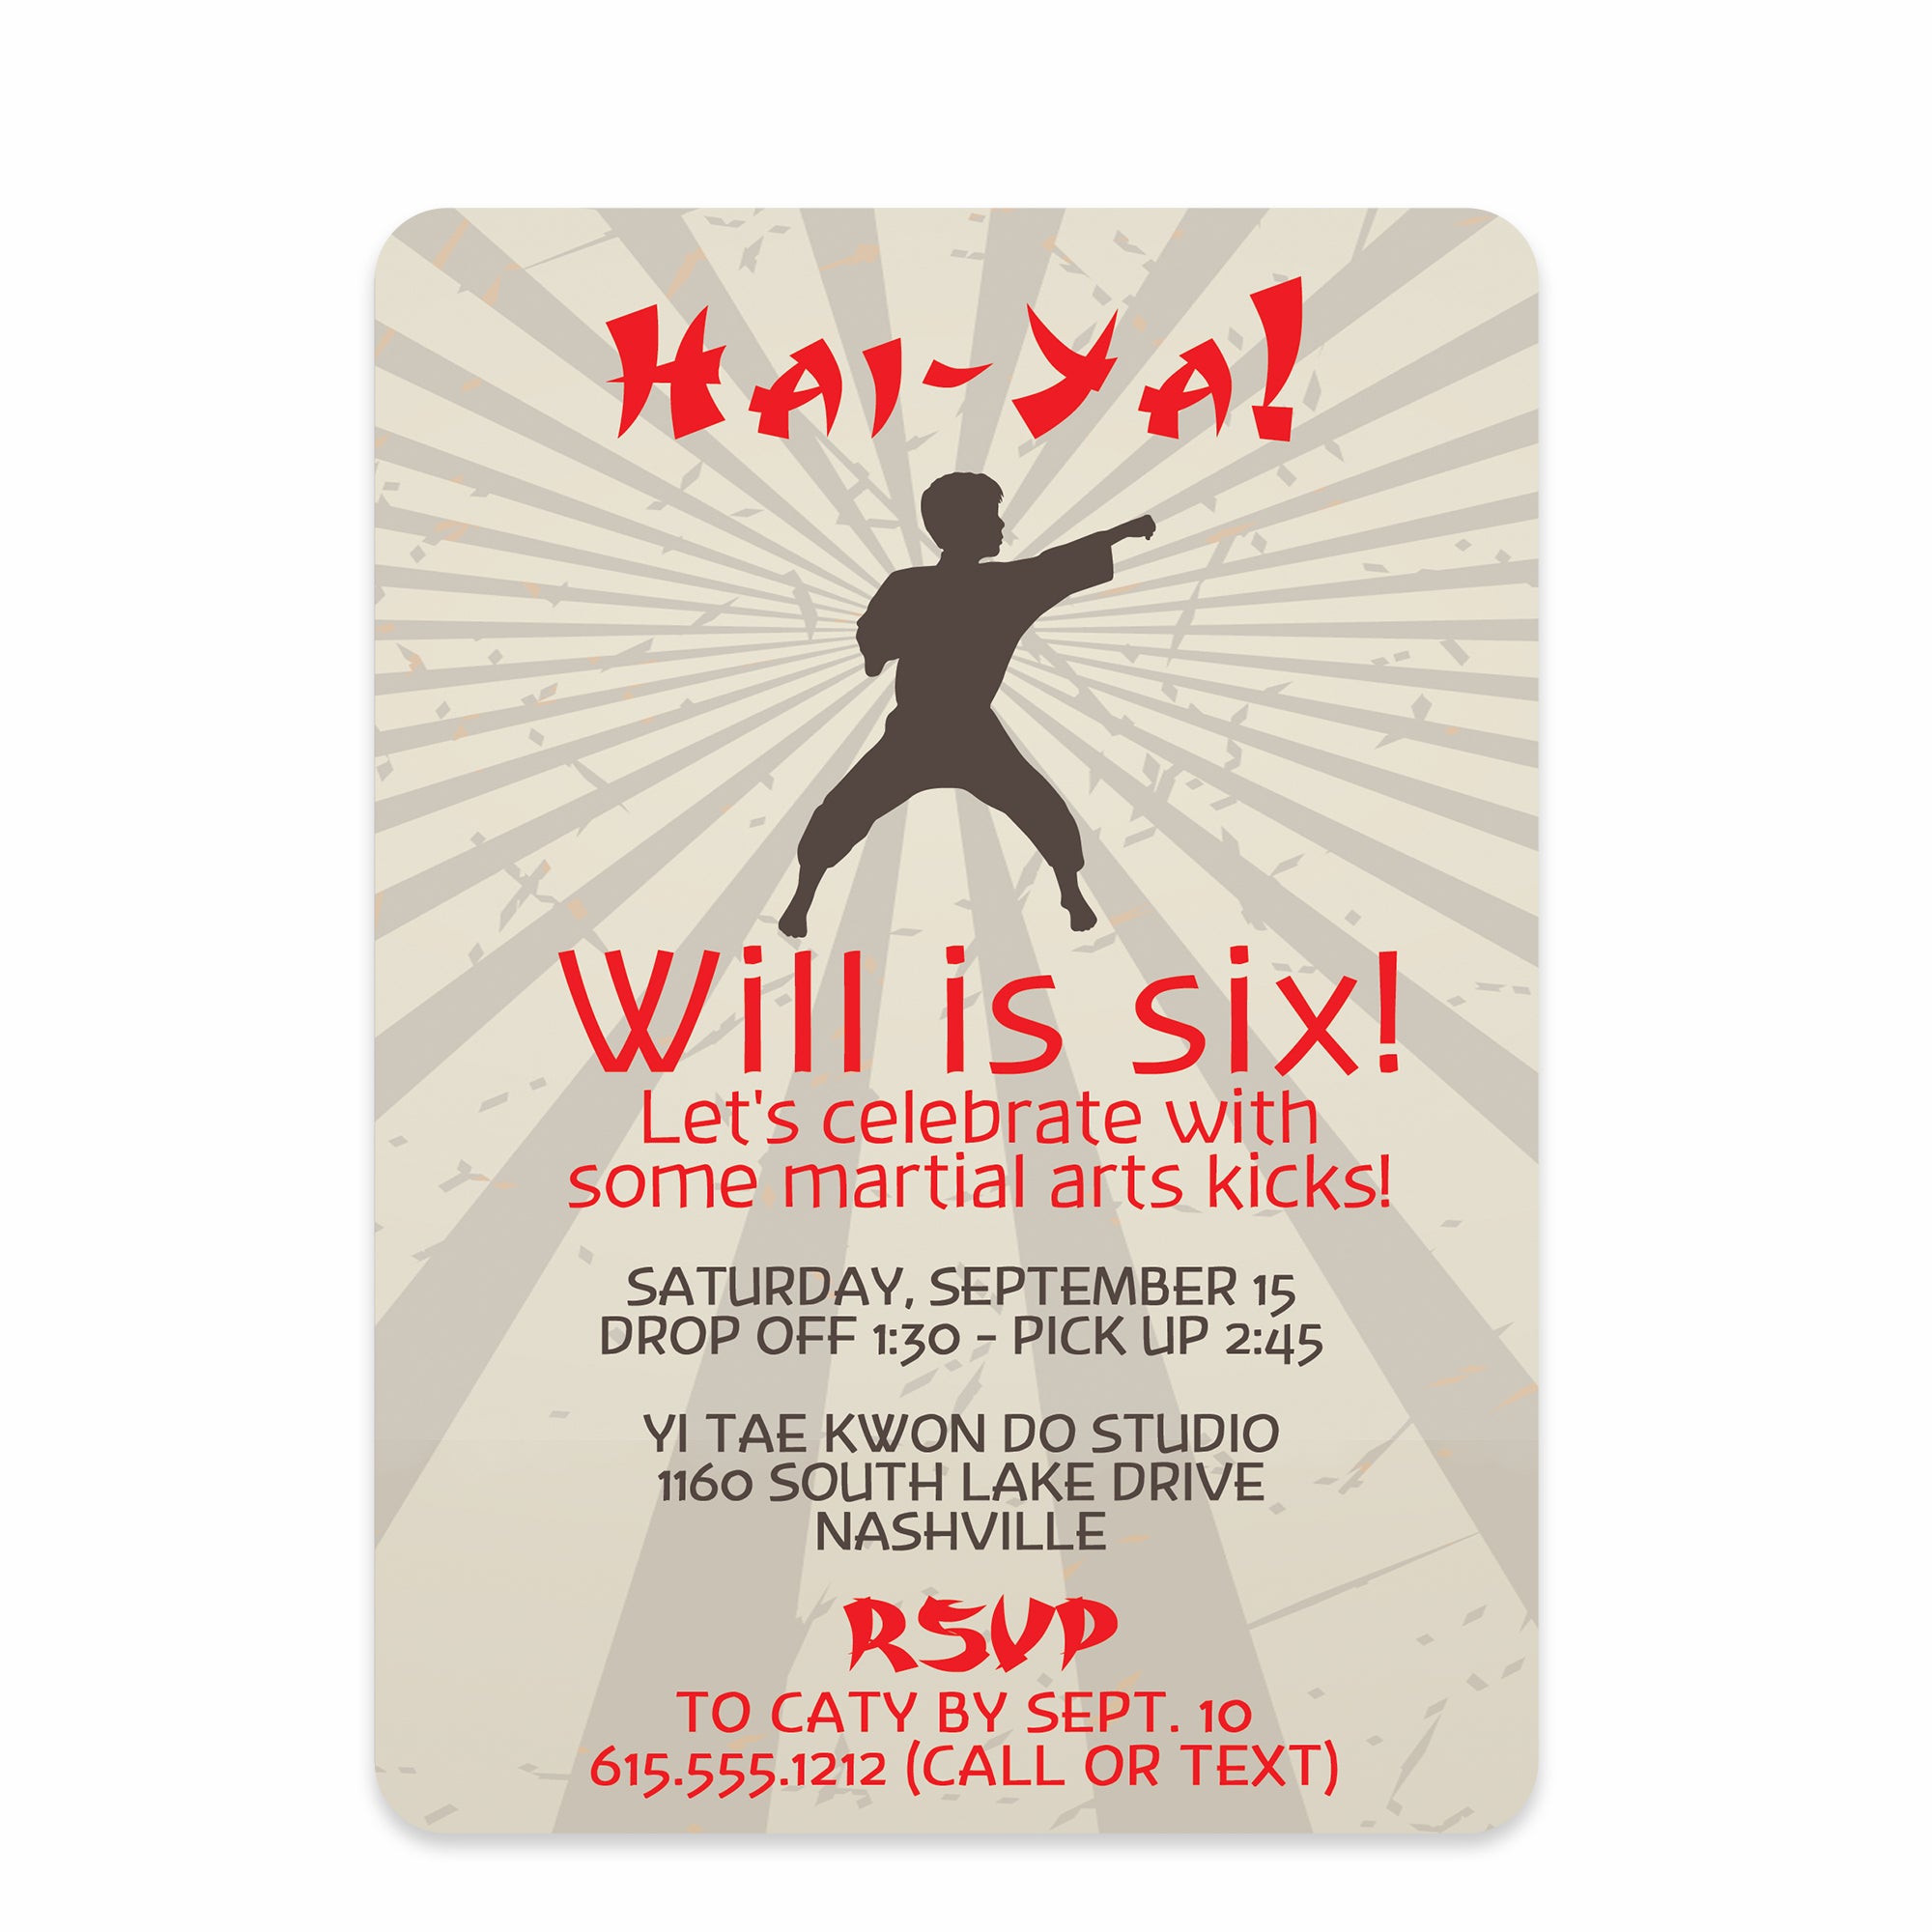 Karate Birthday Invitation, for Martial Arts or Tae Kwondo Party, Printed on heavyweight premiu cardstock from Pipsy.com